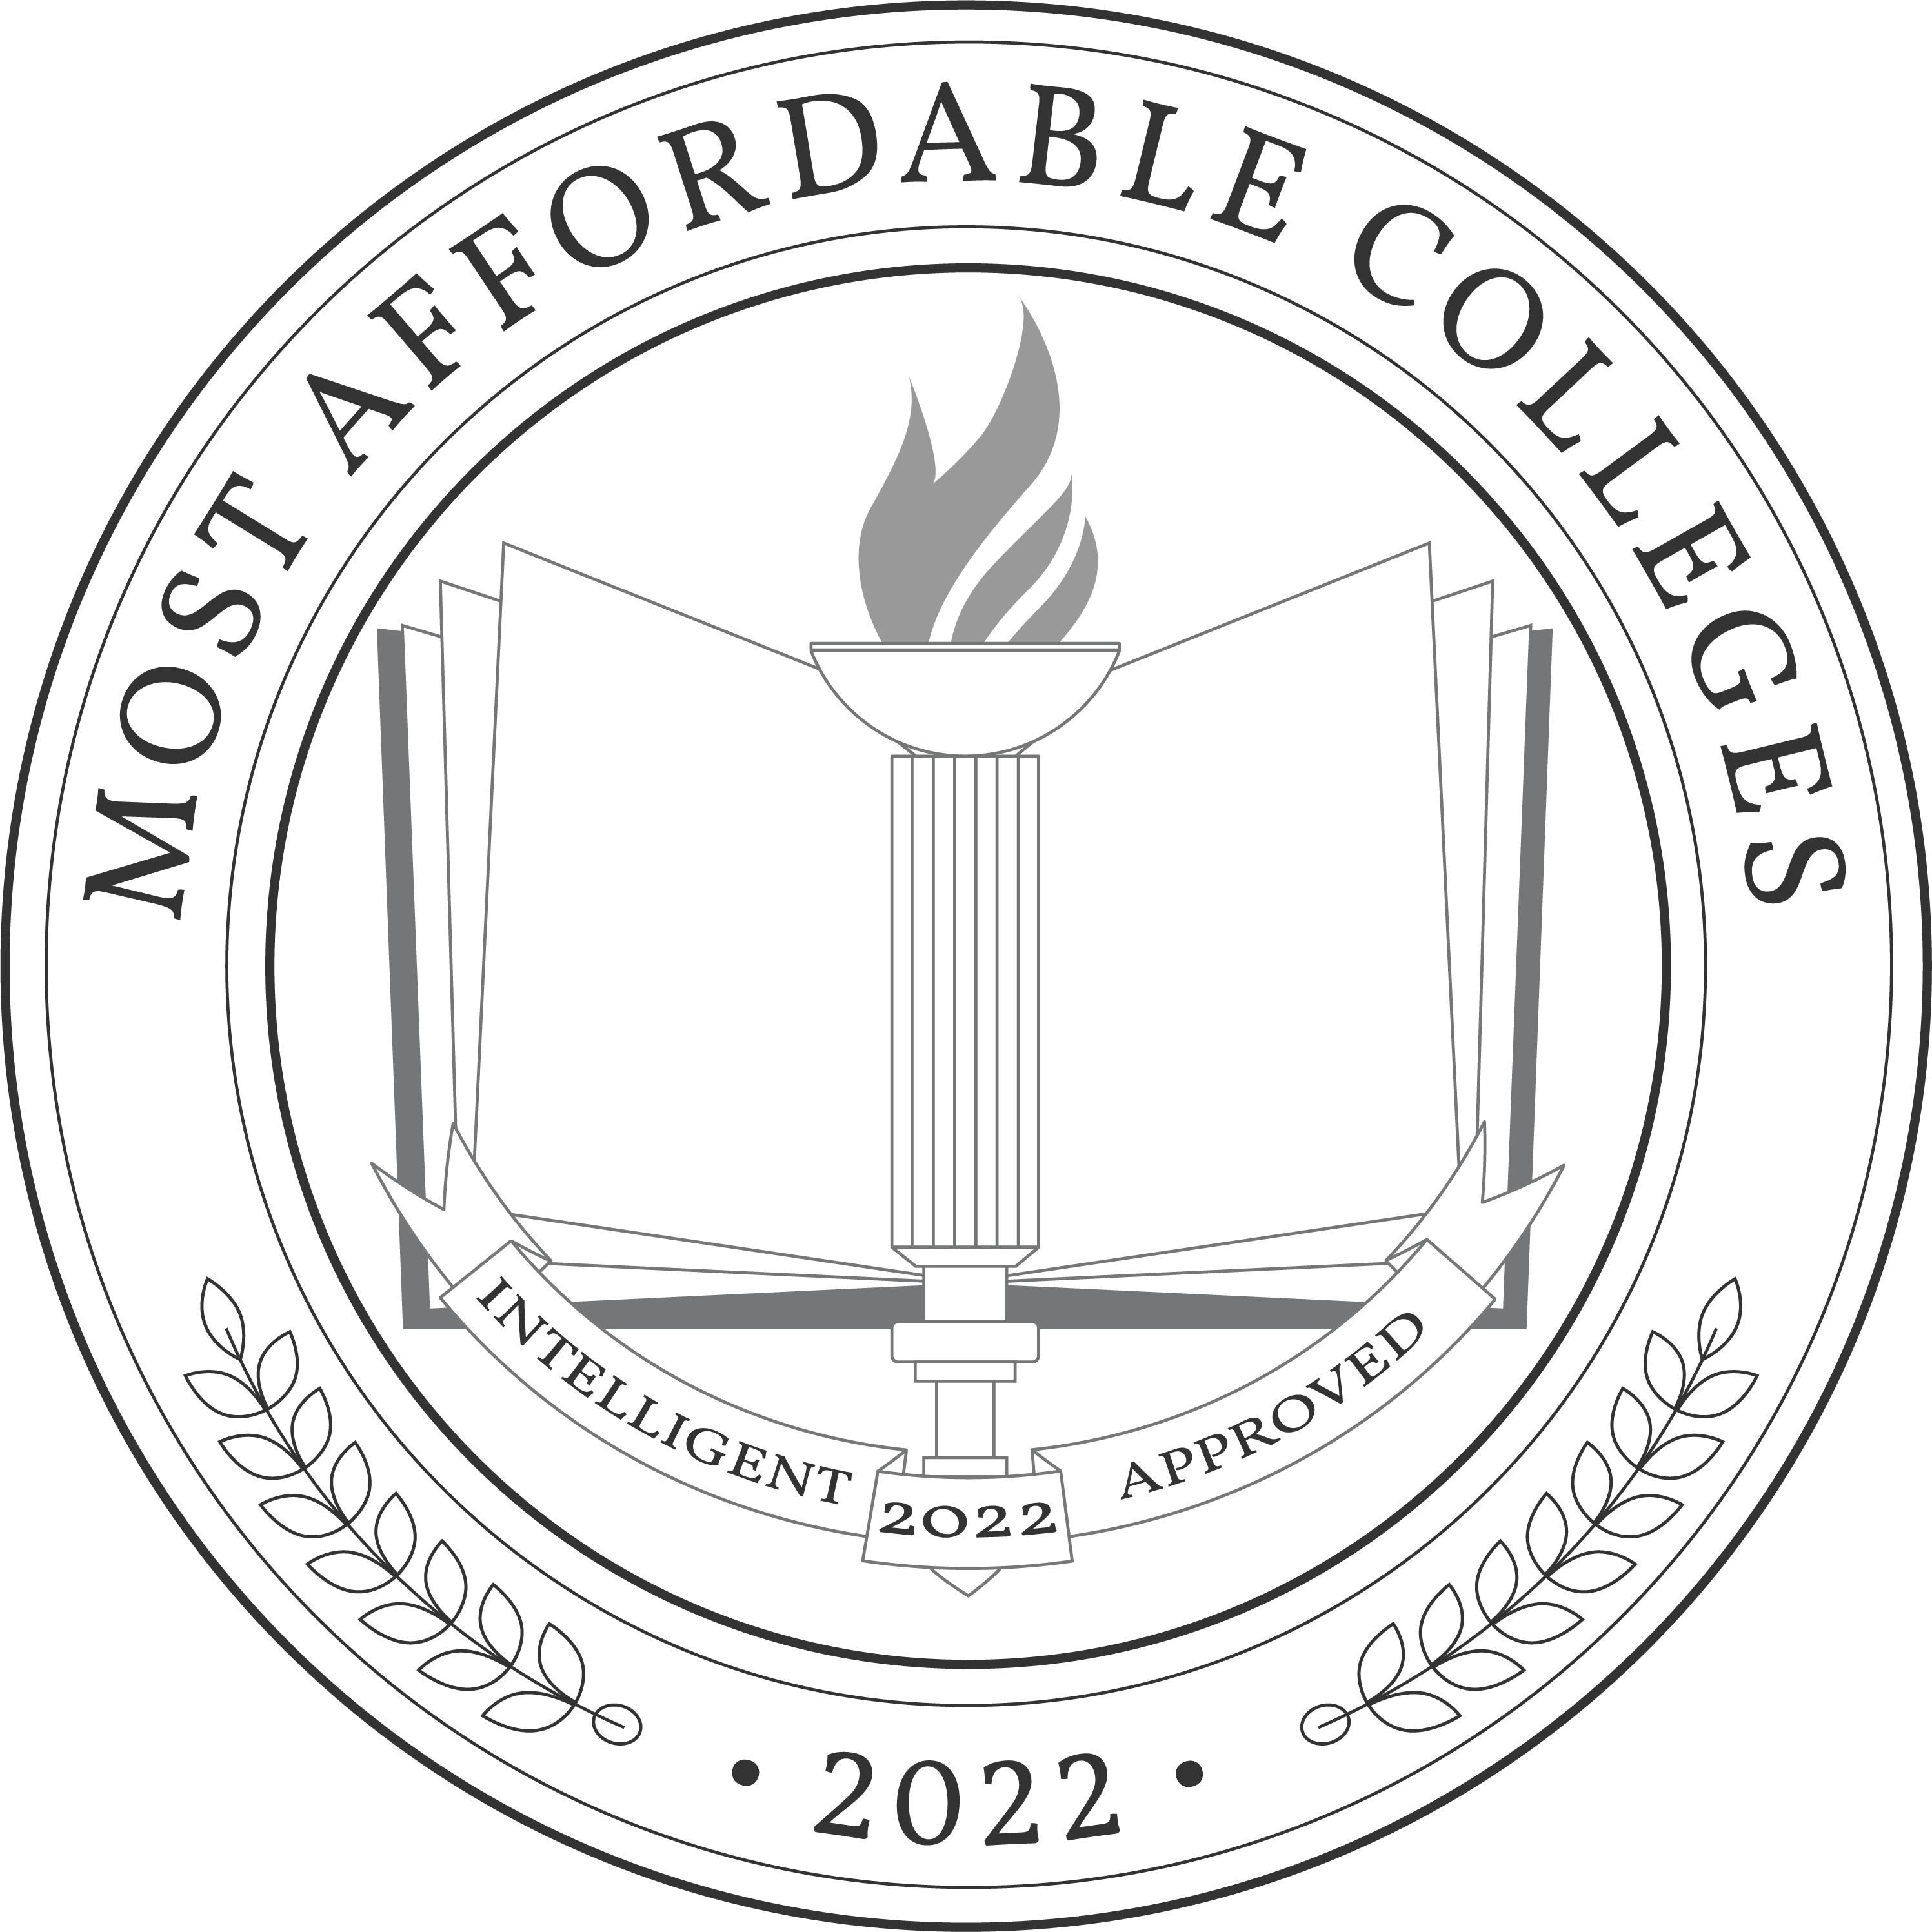 Most Affordable Colleges 2022 Badge